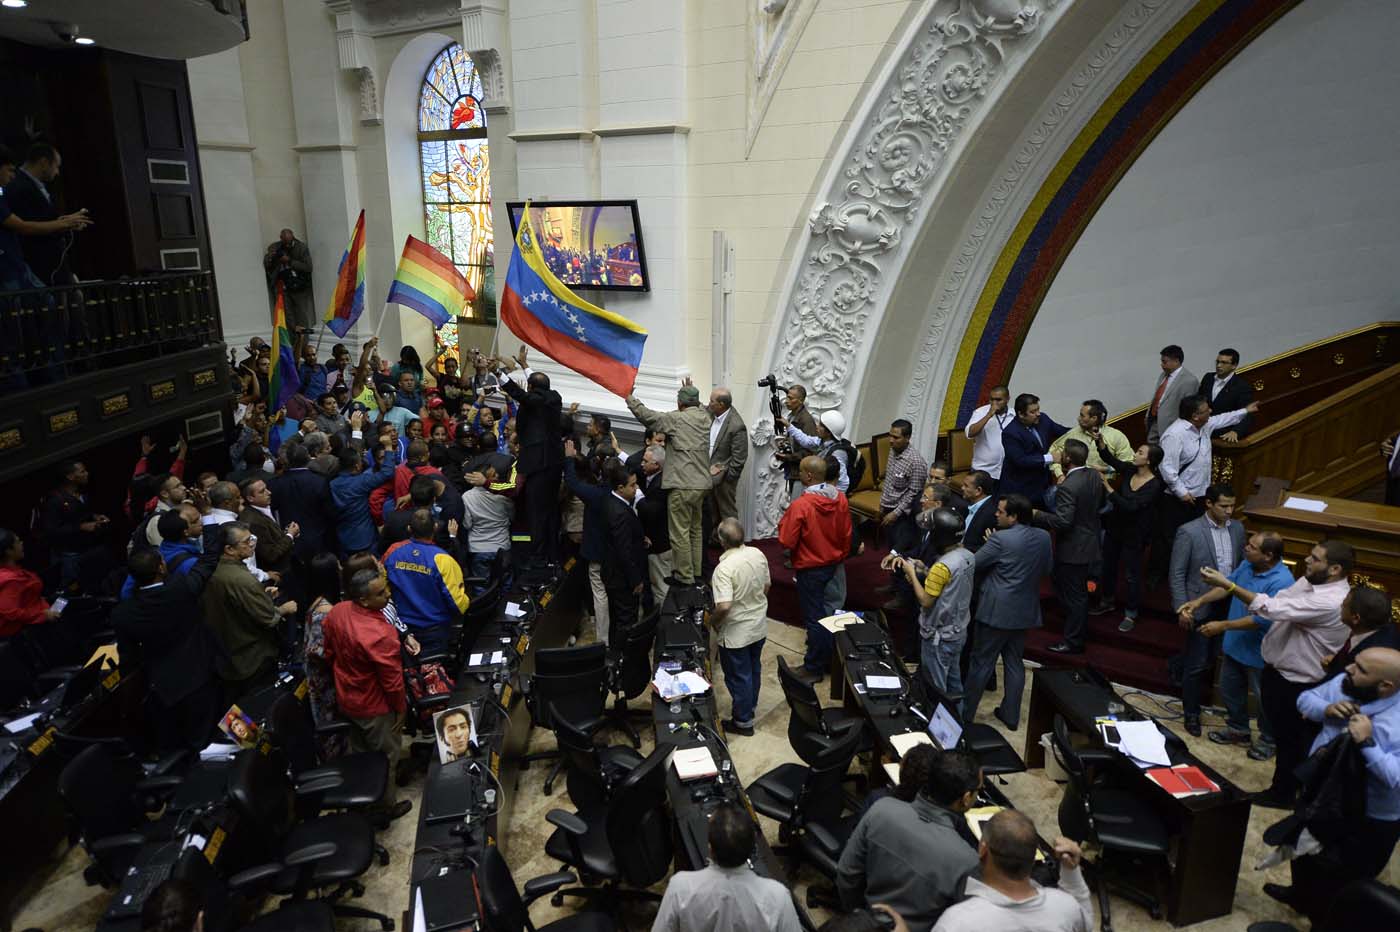 Supporters of Venezuelan President Nicolas Maduro force their way to the National Assembly during an extraordinary session called by opposition leaders, in Caracas on October 23, 2016. The opposition Democratic Unity Movement (MUD) called a Parliamentary session to debate putting President Nicolas Maduro on trial to "restore democracy" in an emergency session that descended into chaos as supporters of the leftist leader briefly seized the chamber. / AFP PHOTO / FEDERICO PARRA